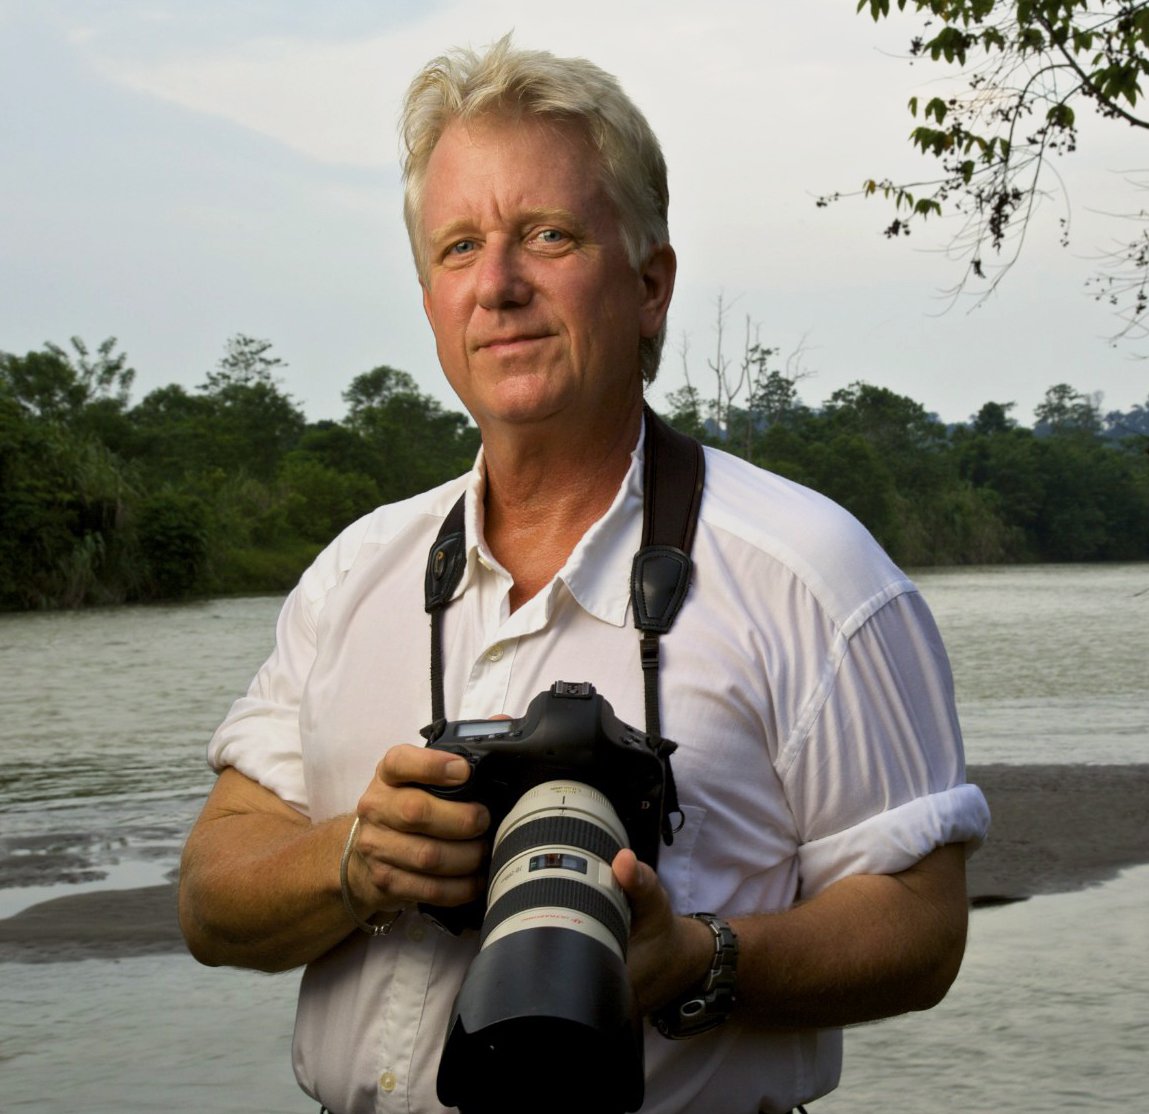 On April 13th, go around the world in search of big cats with award-winning photographer Steve Winter at National Geographic Live 'On the Trail of Big Cats.” #NatGeoLive Reserve your seats → bit.ly/2TgA1nt